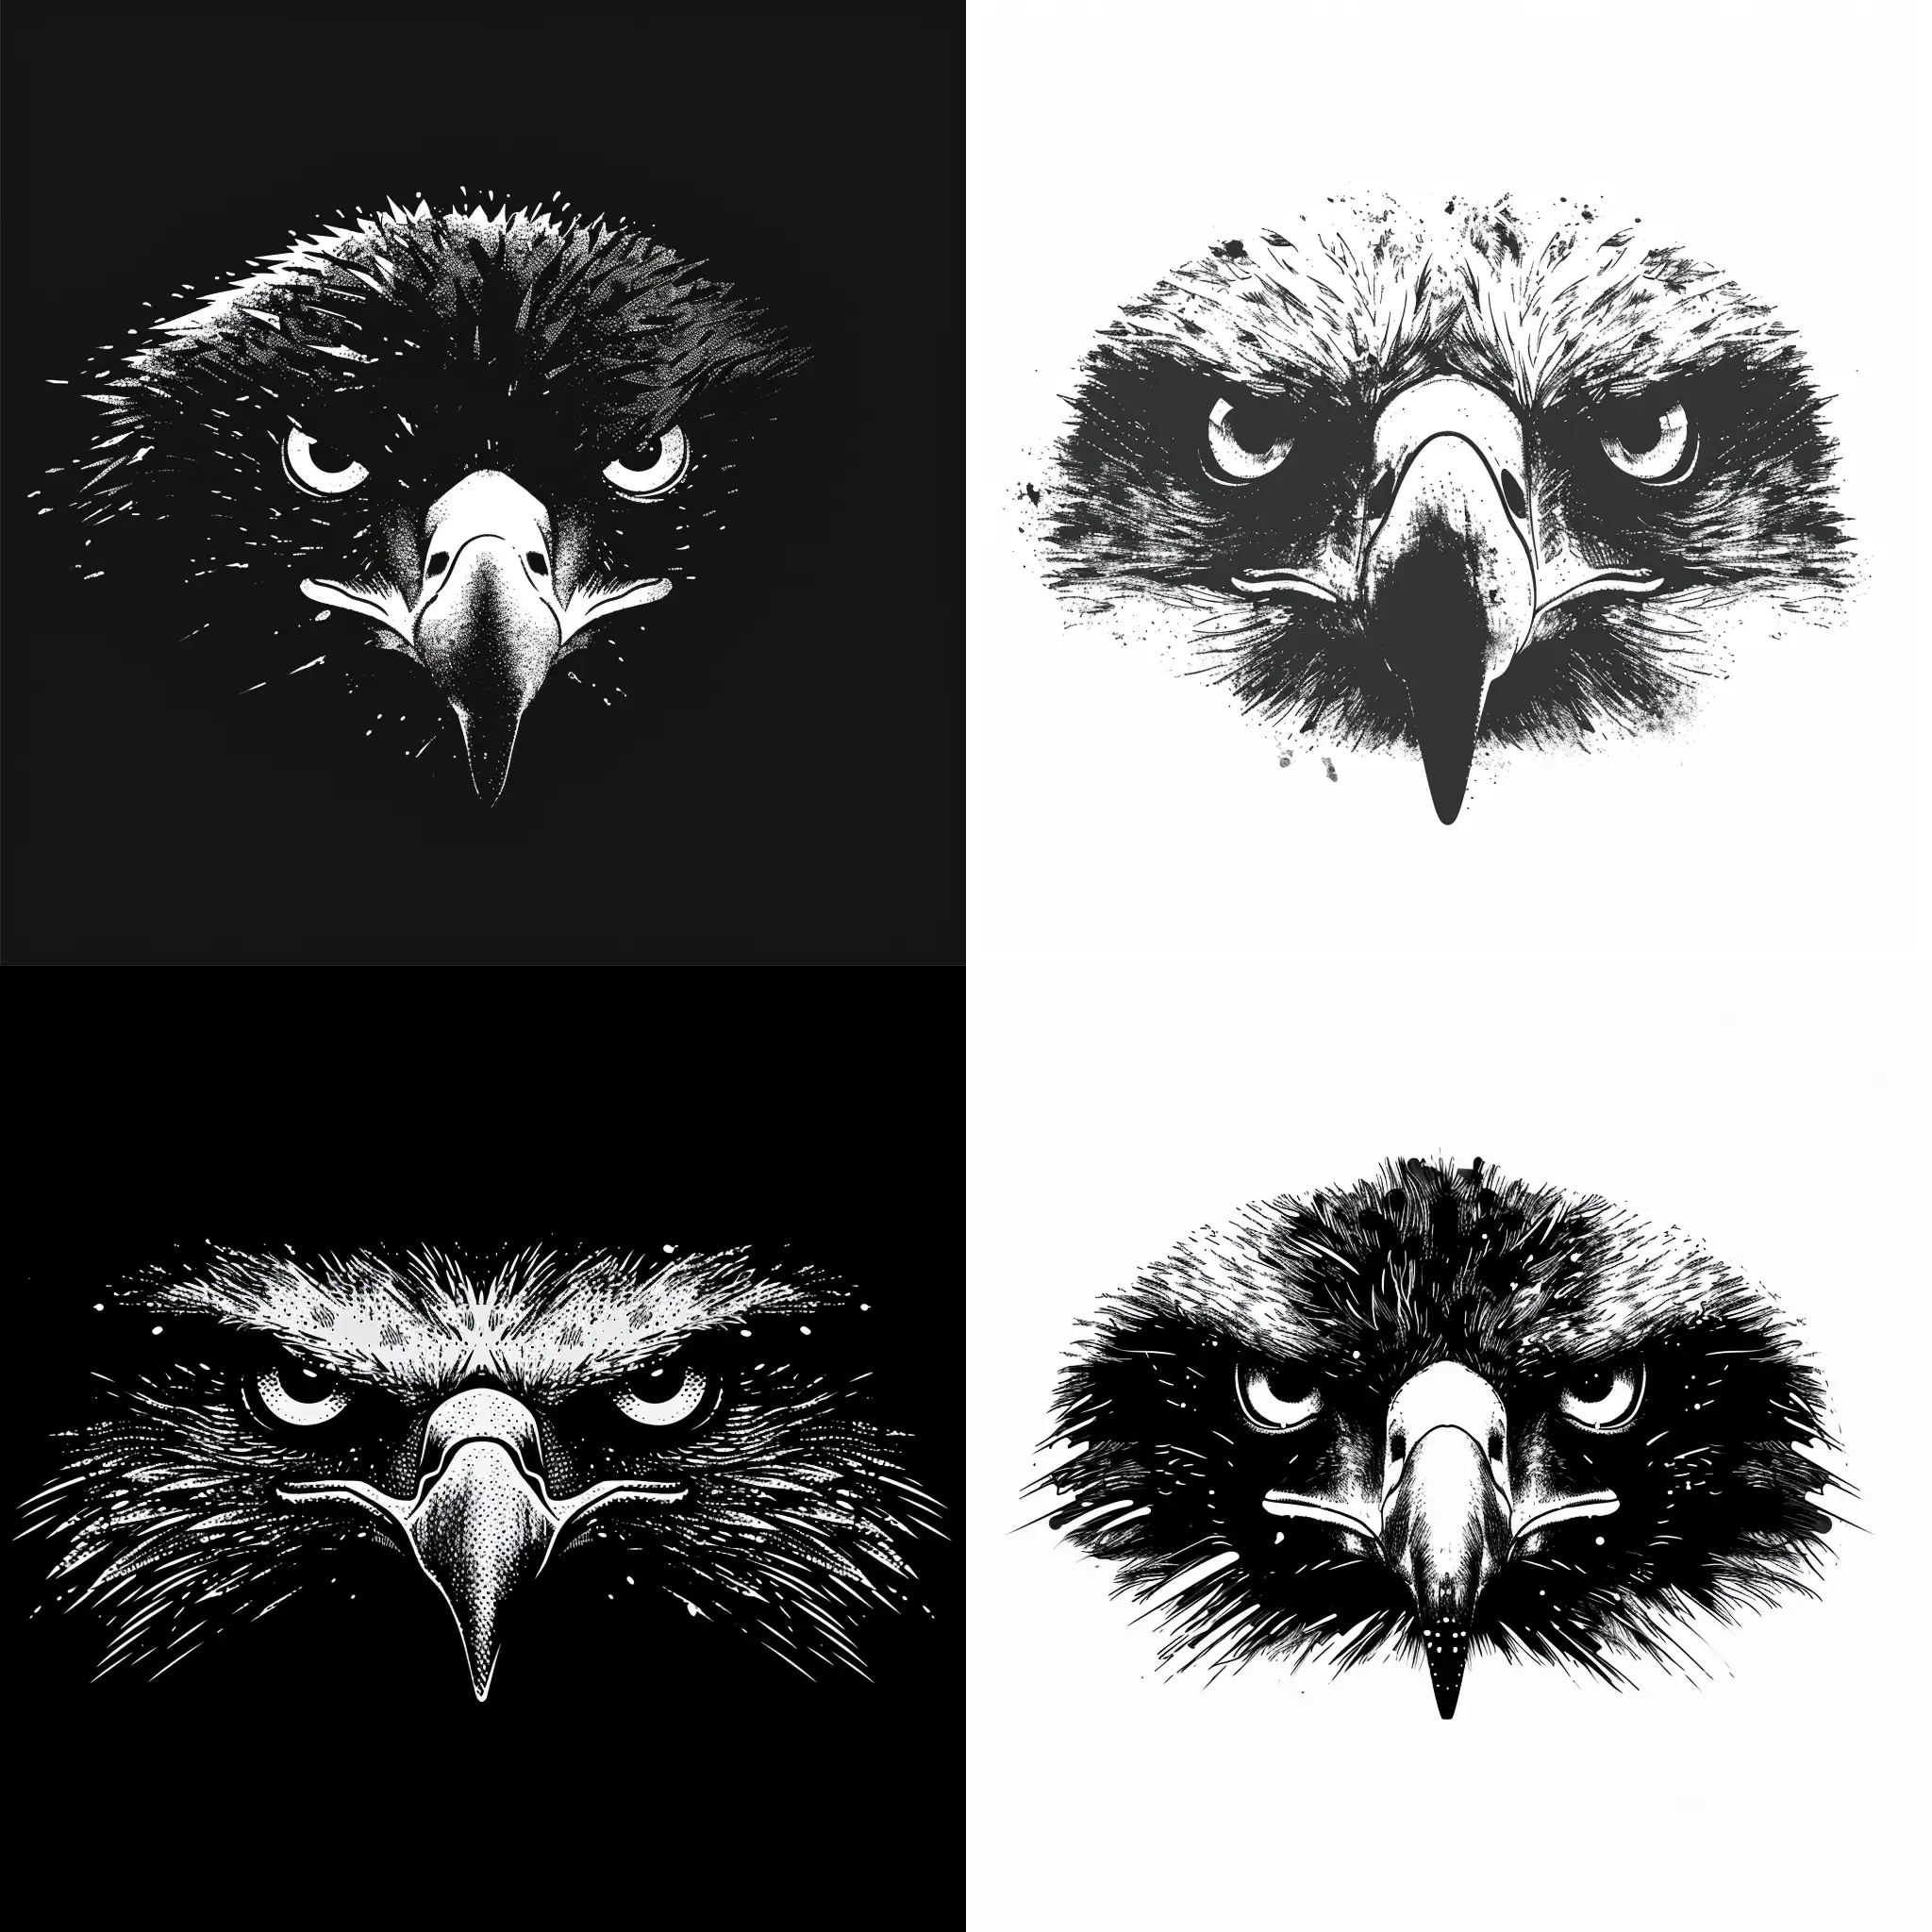 Majestic-Snow-Eagle-with-Piercing-Eyes-Minimalistic-Comic-Sketch-Vector-Logo